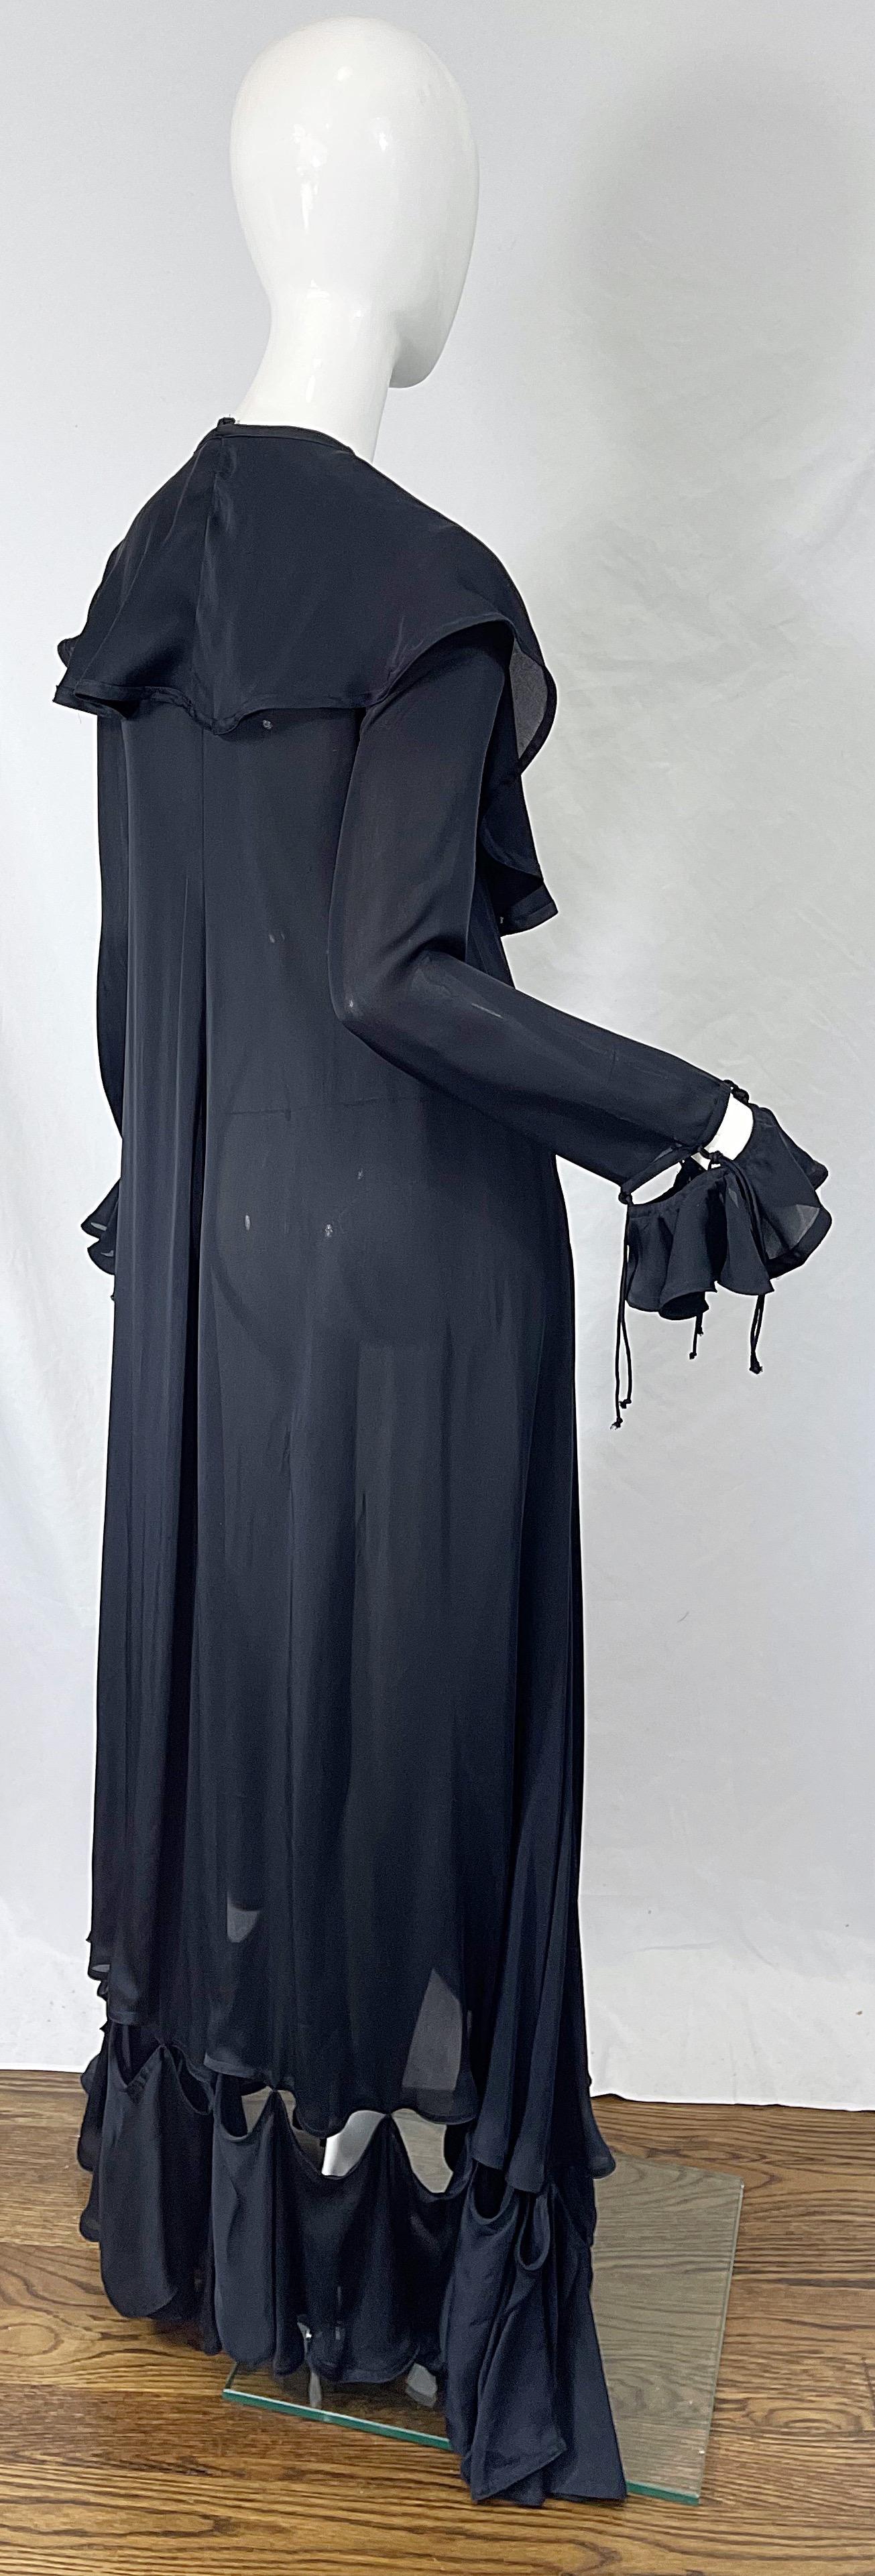 Yves Saint Laurent by Tom Ford Fall 2003 Runway Black Silk Chiffon Gown Size 38 For Sale 7